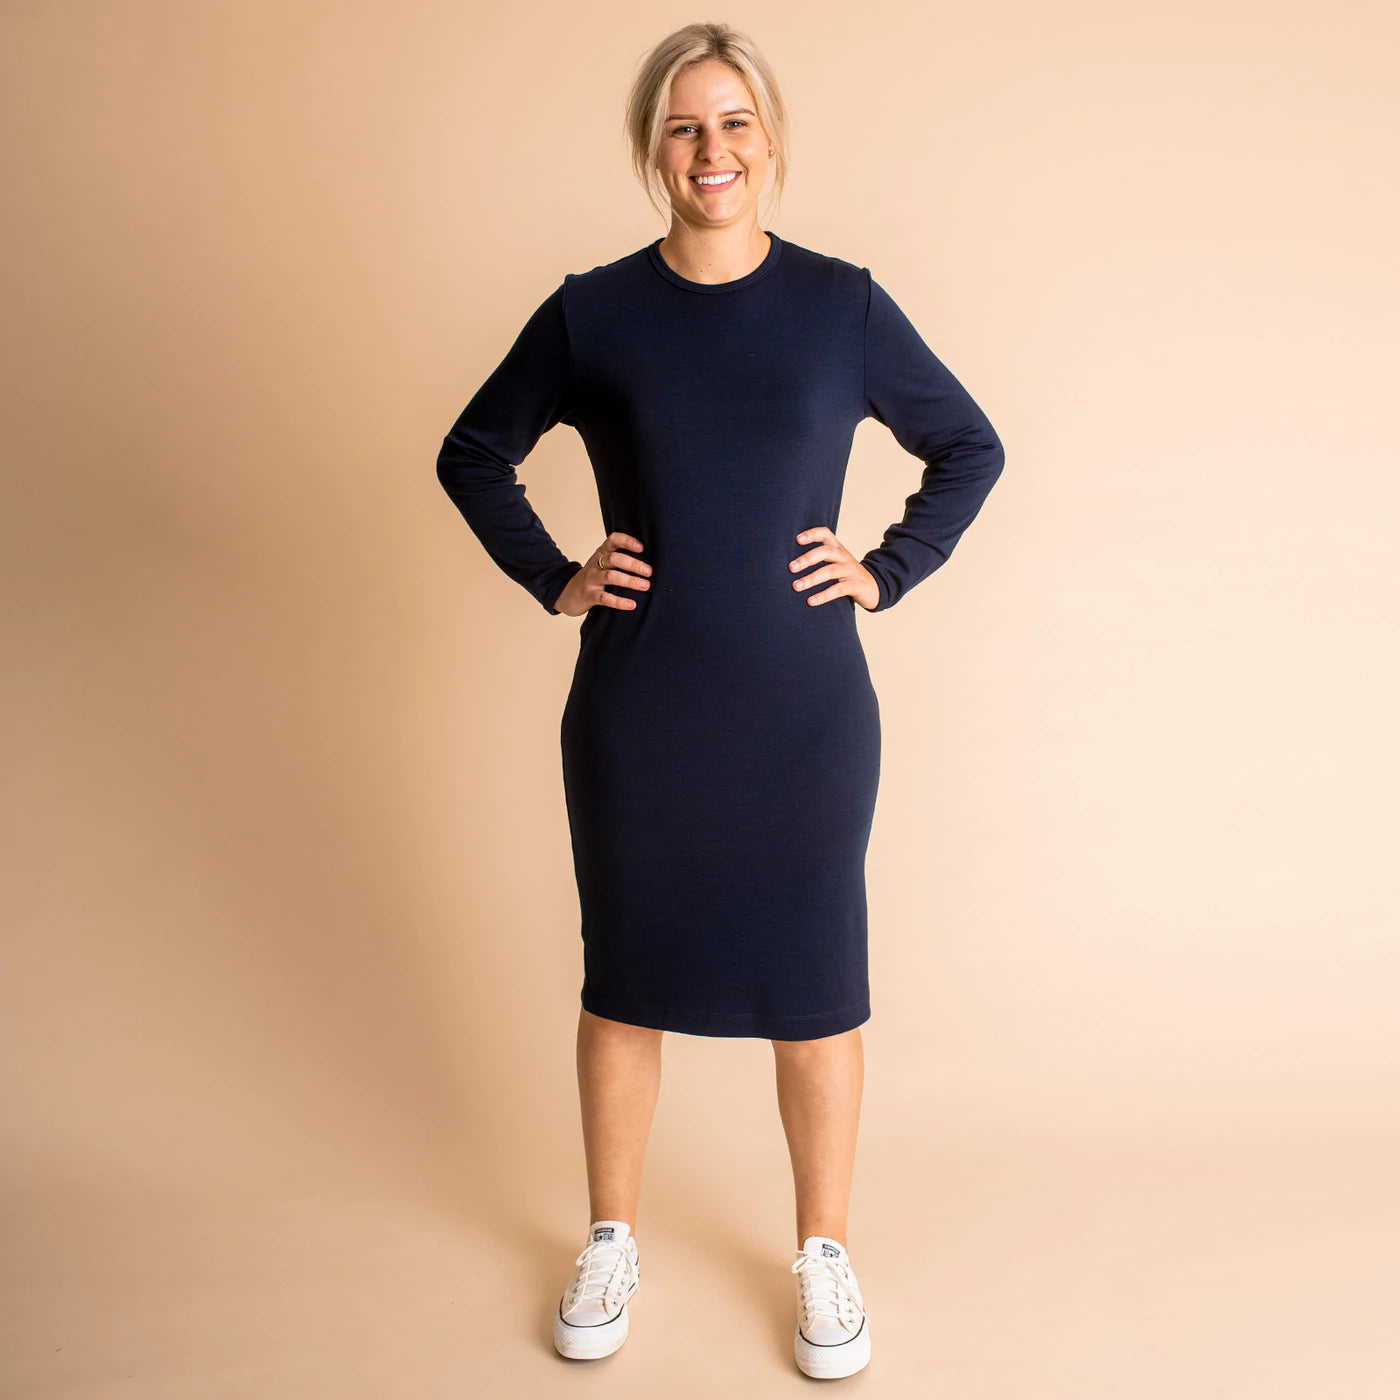 Woolerina Relaxed Fit Dress - Navy